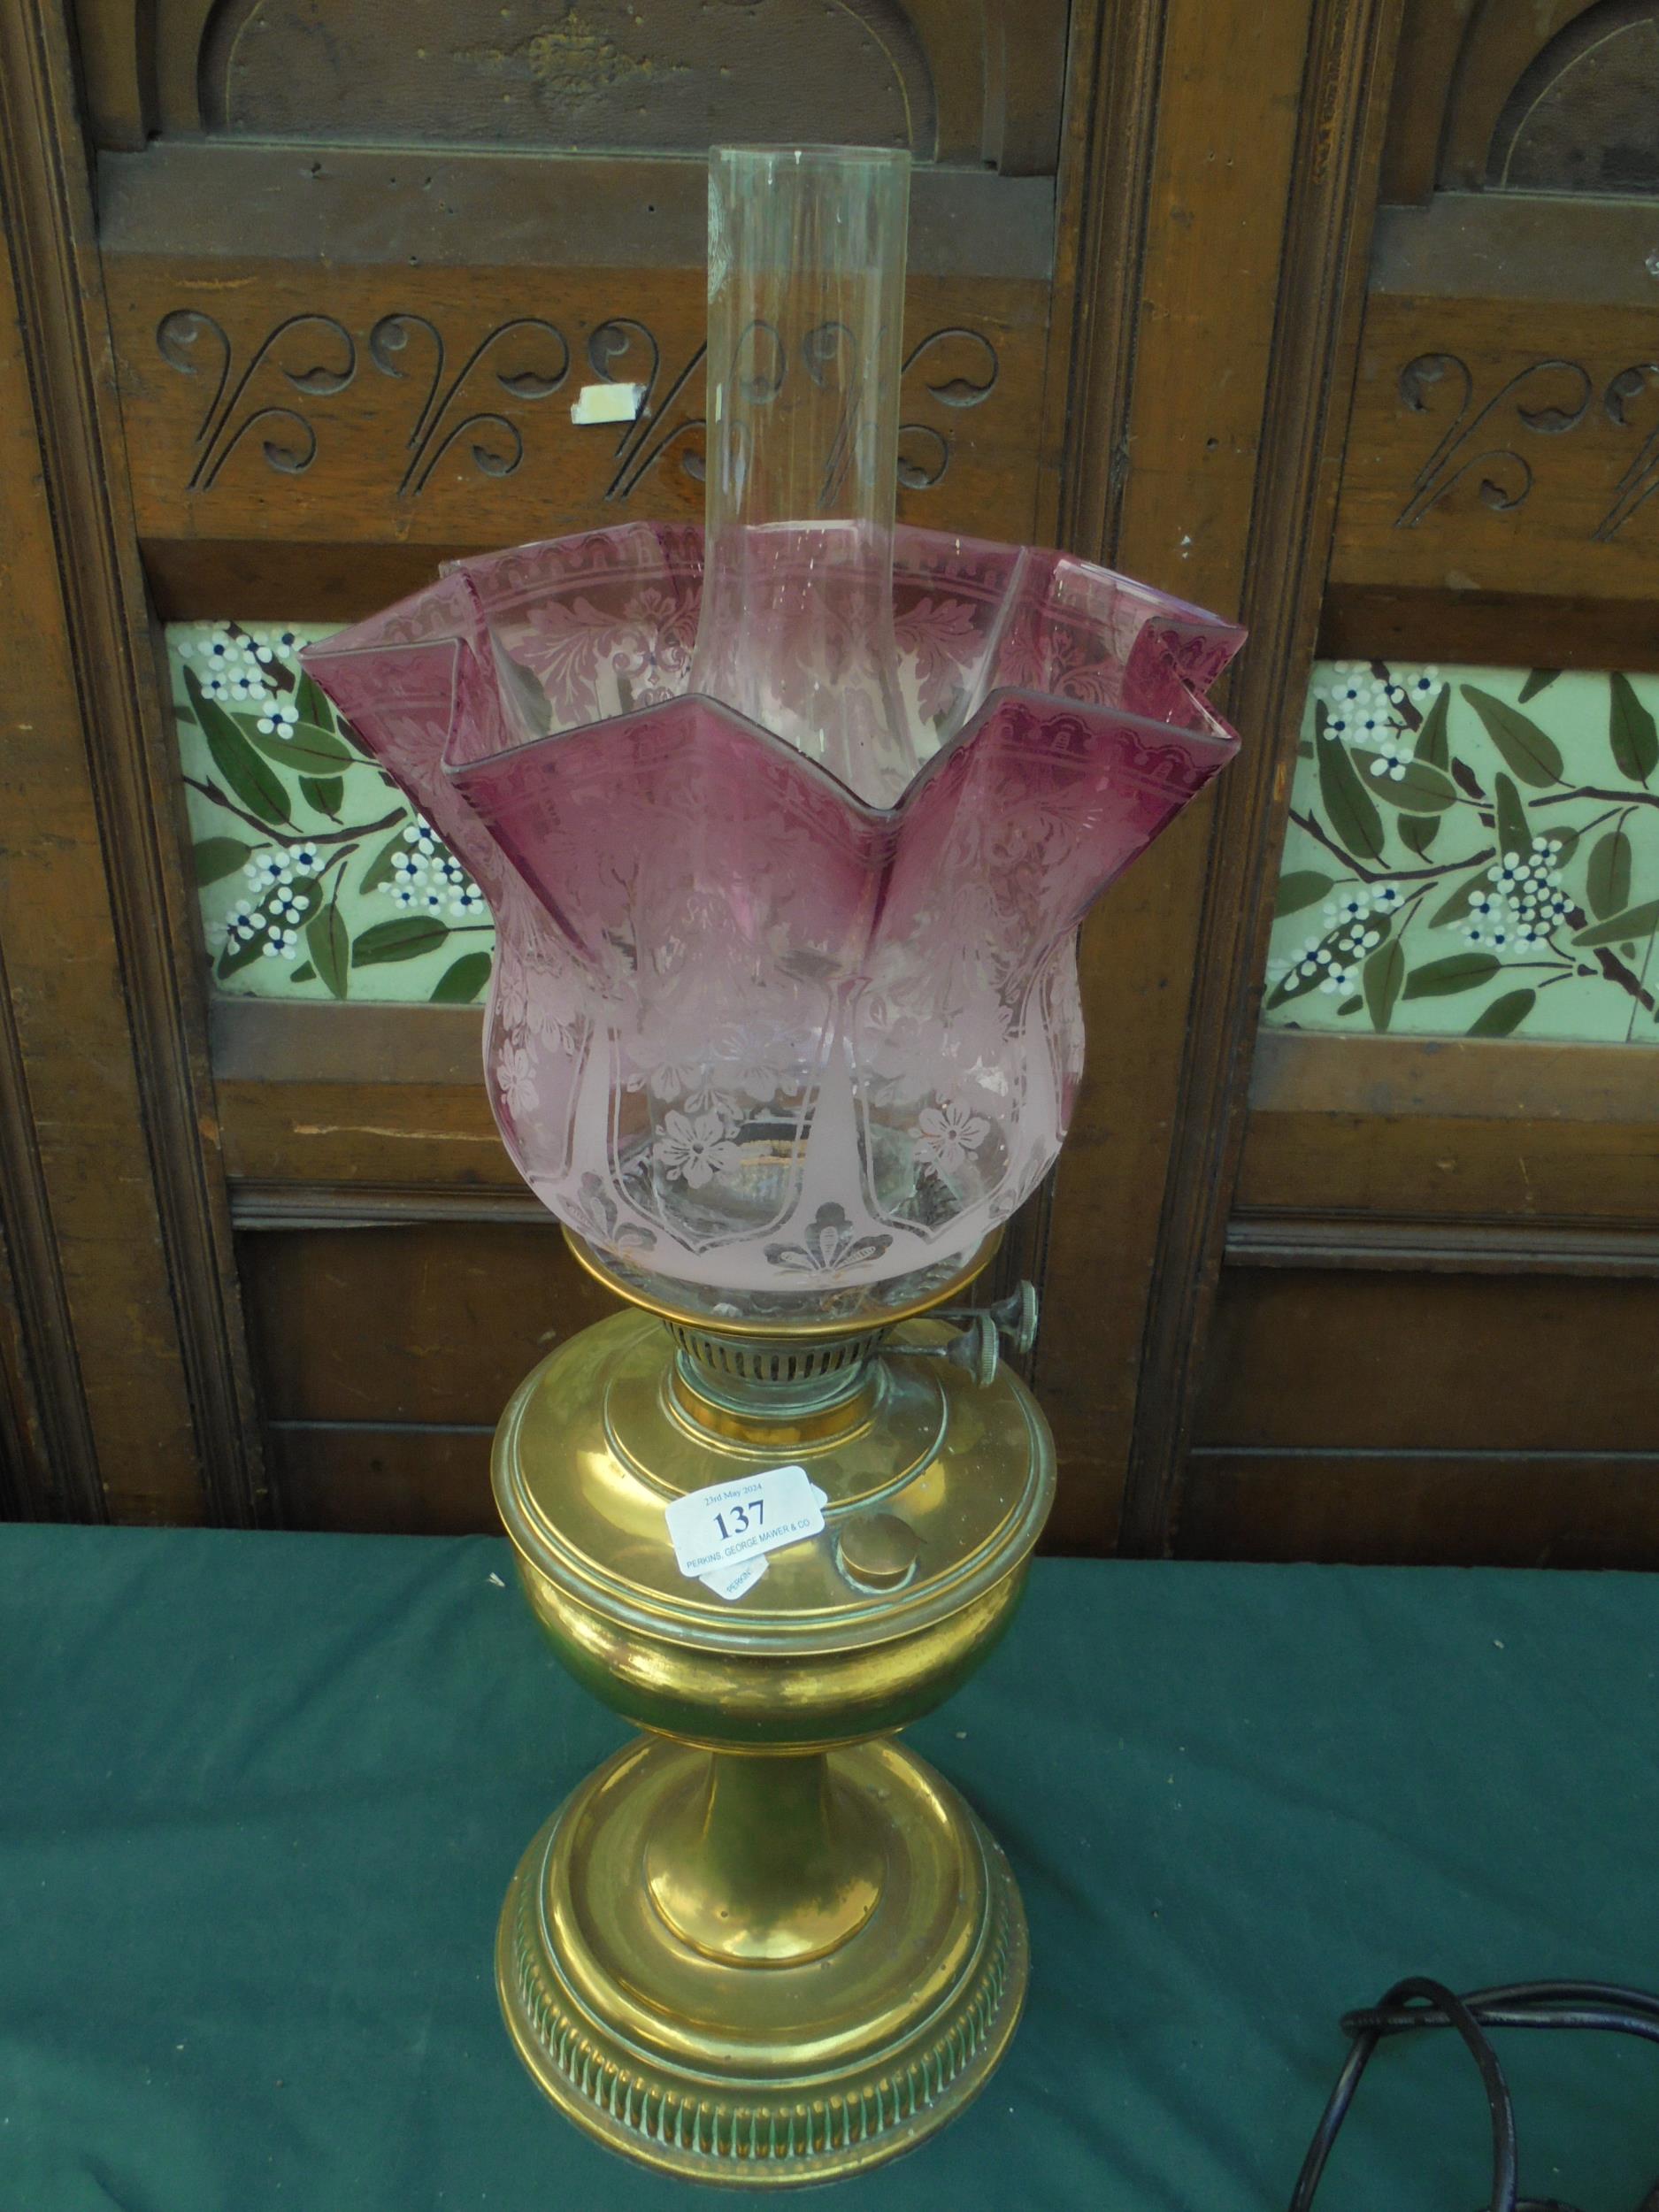 Brass oil lamp with pink decorative shade